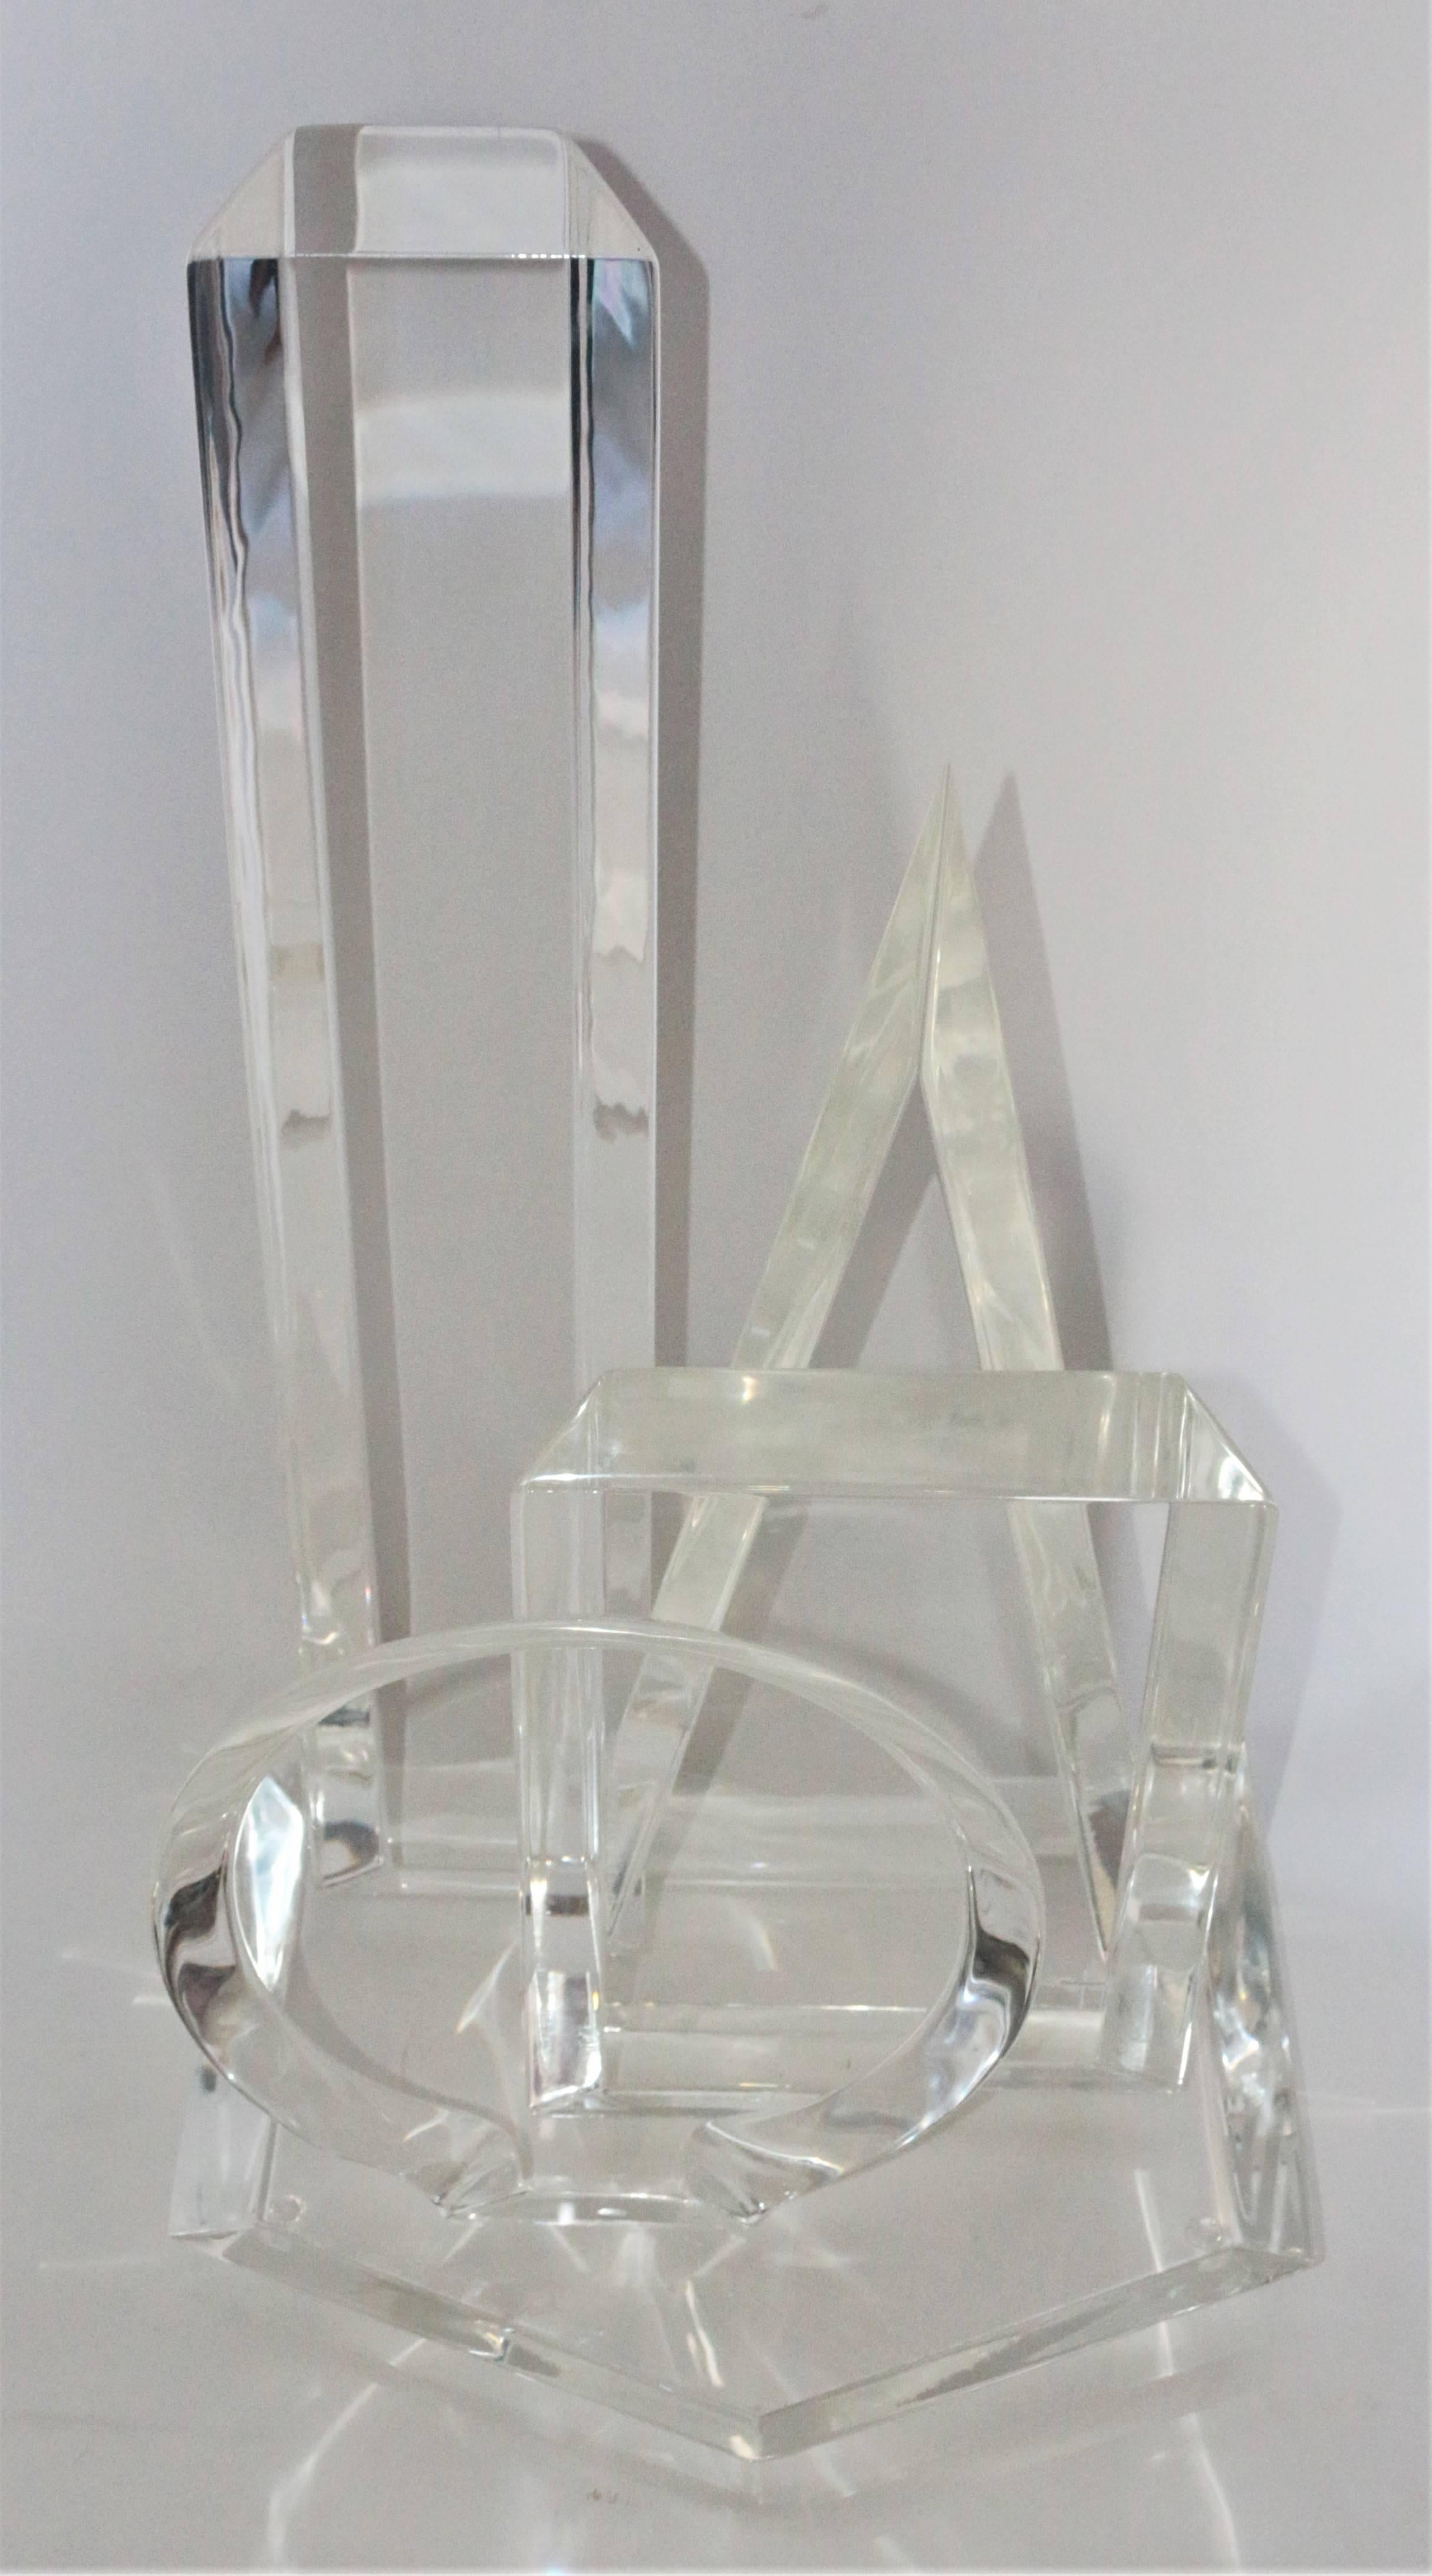 Mid-Century Modern 1963 original Van Teal acrylic Lucite sculpture signed. This sculpture has been molded to show a circle, square, triangle and rectangle. All shapes have beveled properties. The base is shaped like a Pentagon holding each